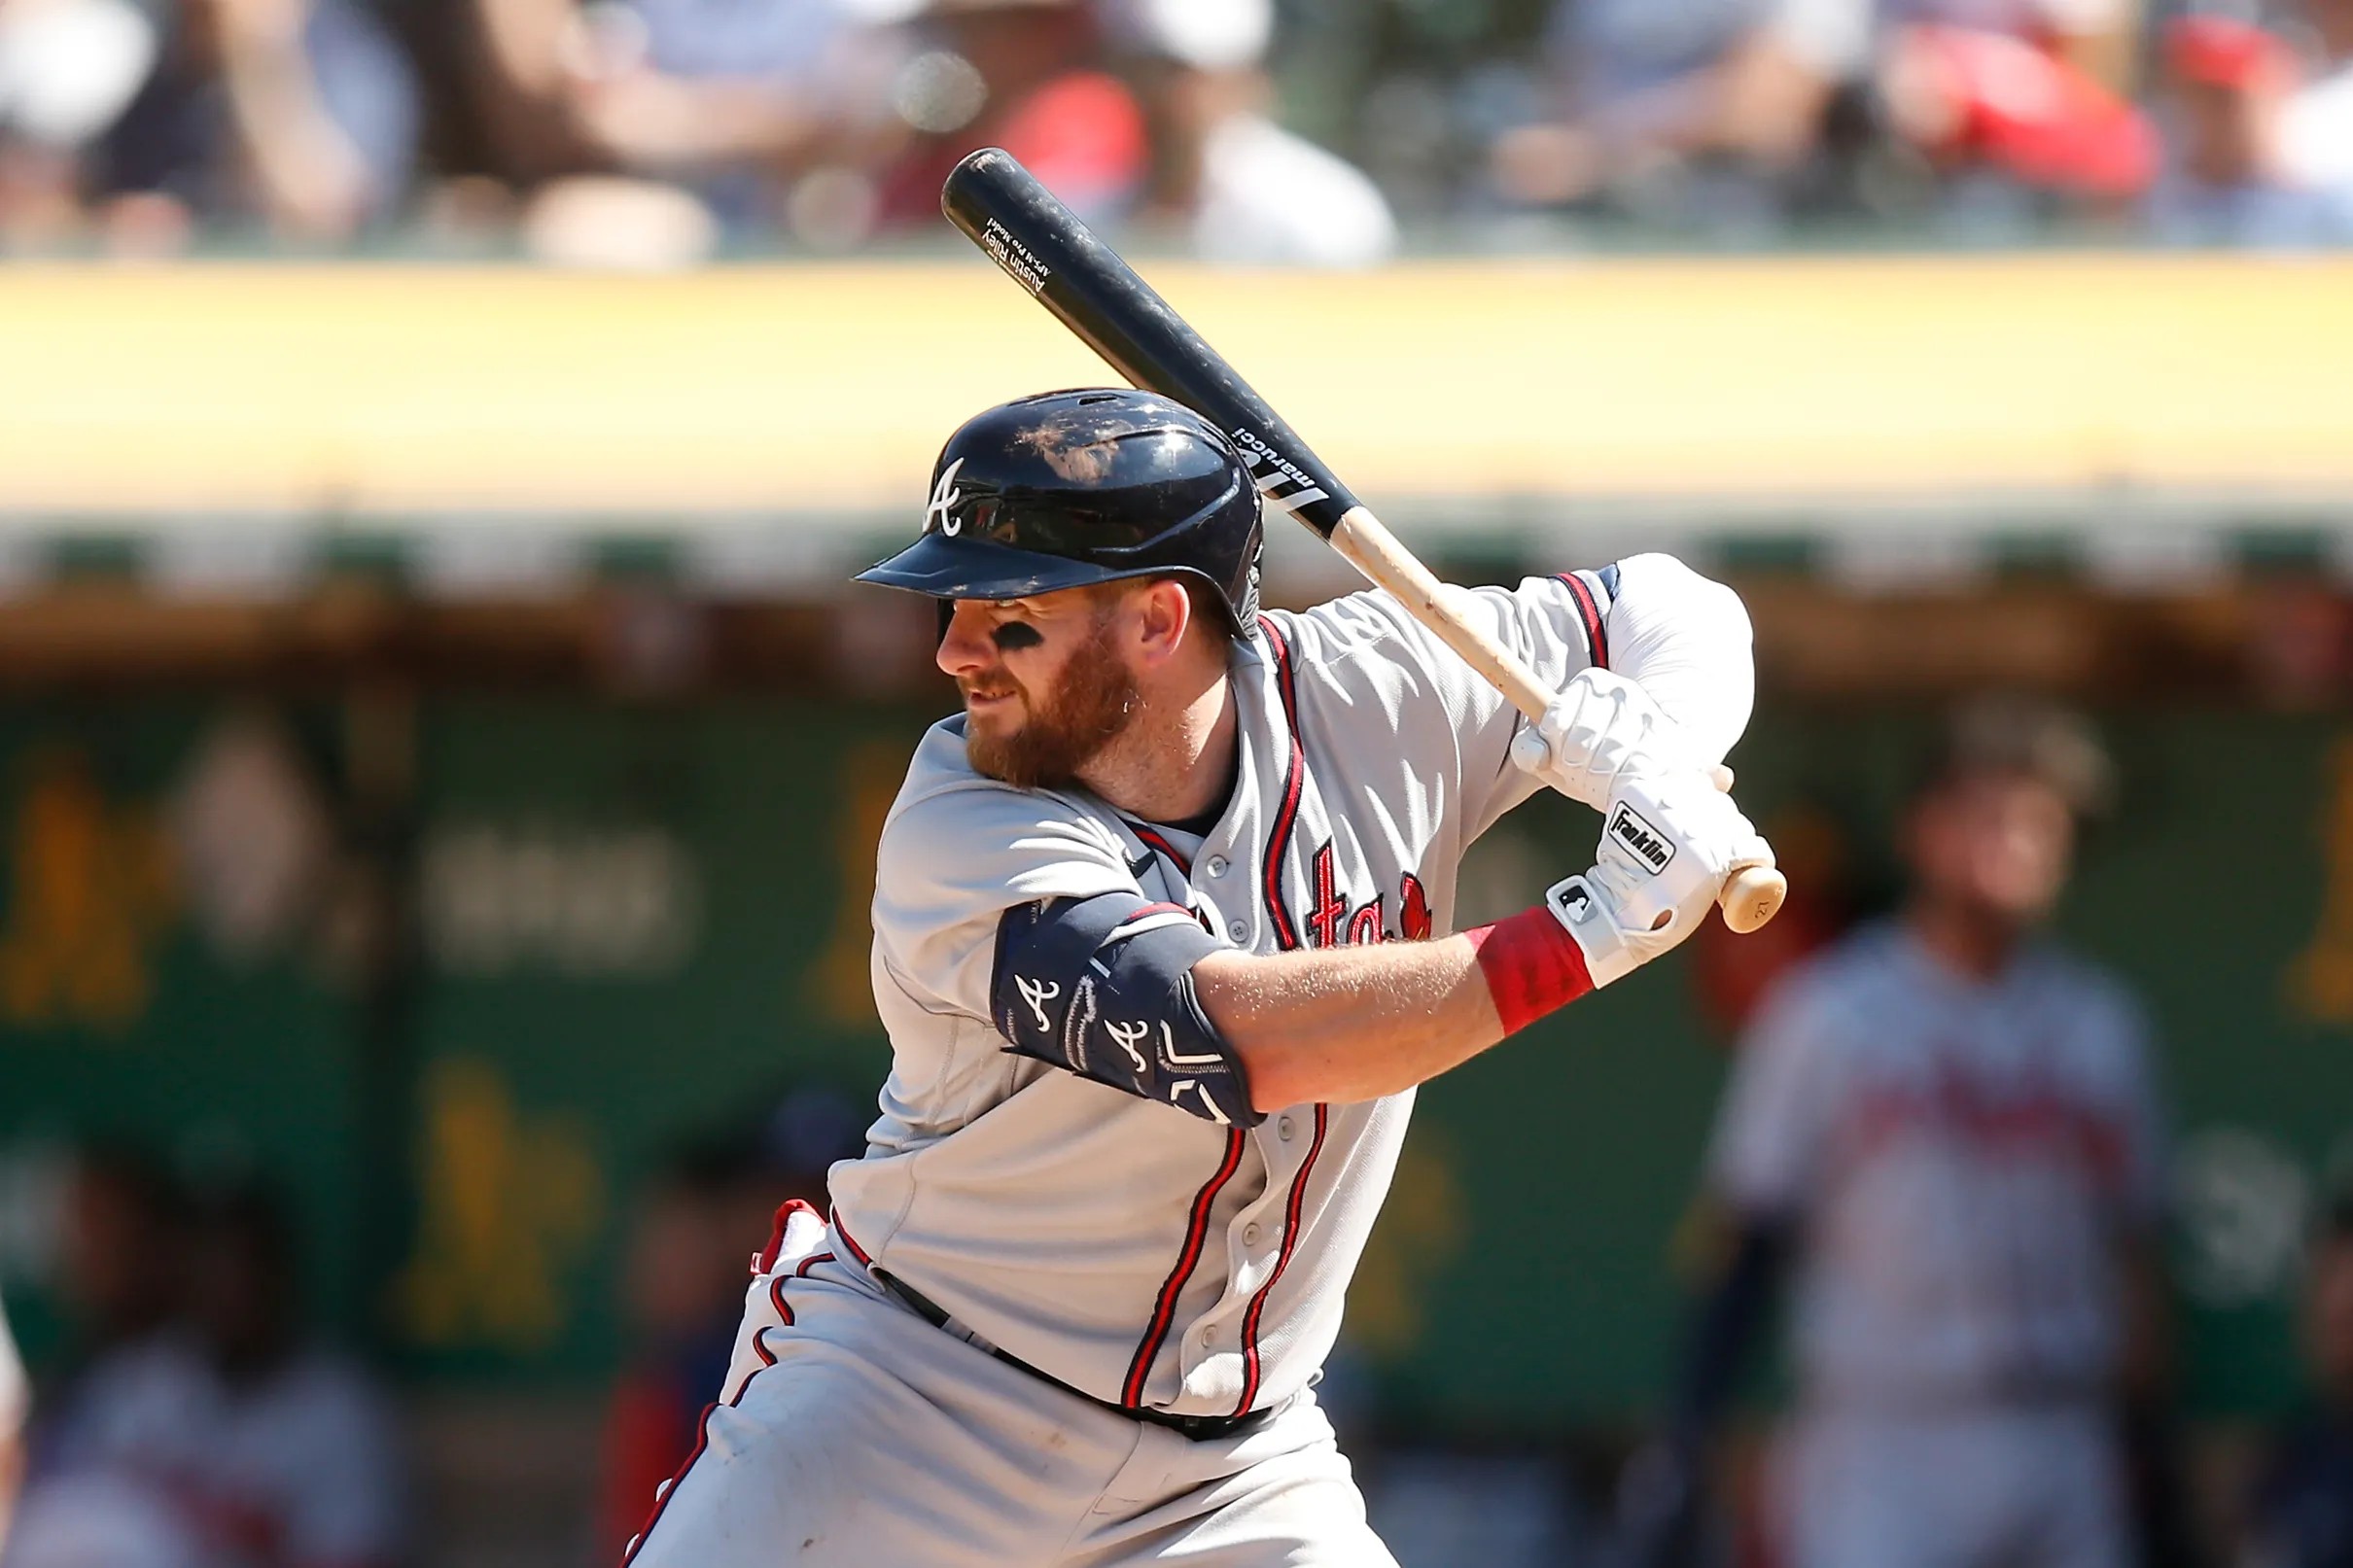 Culberson earns another start, moves up in lineup